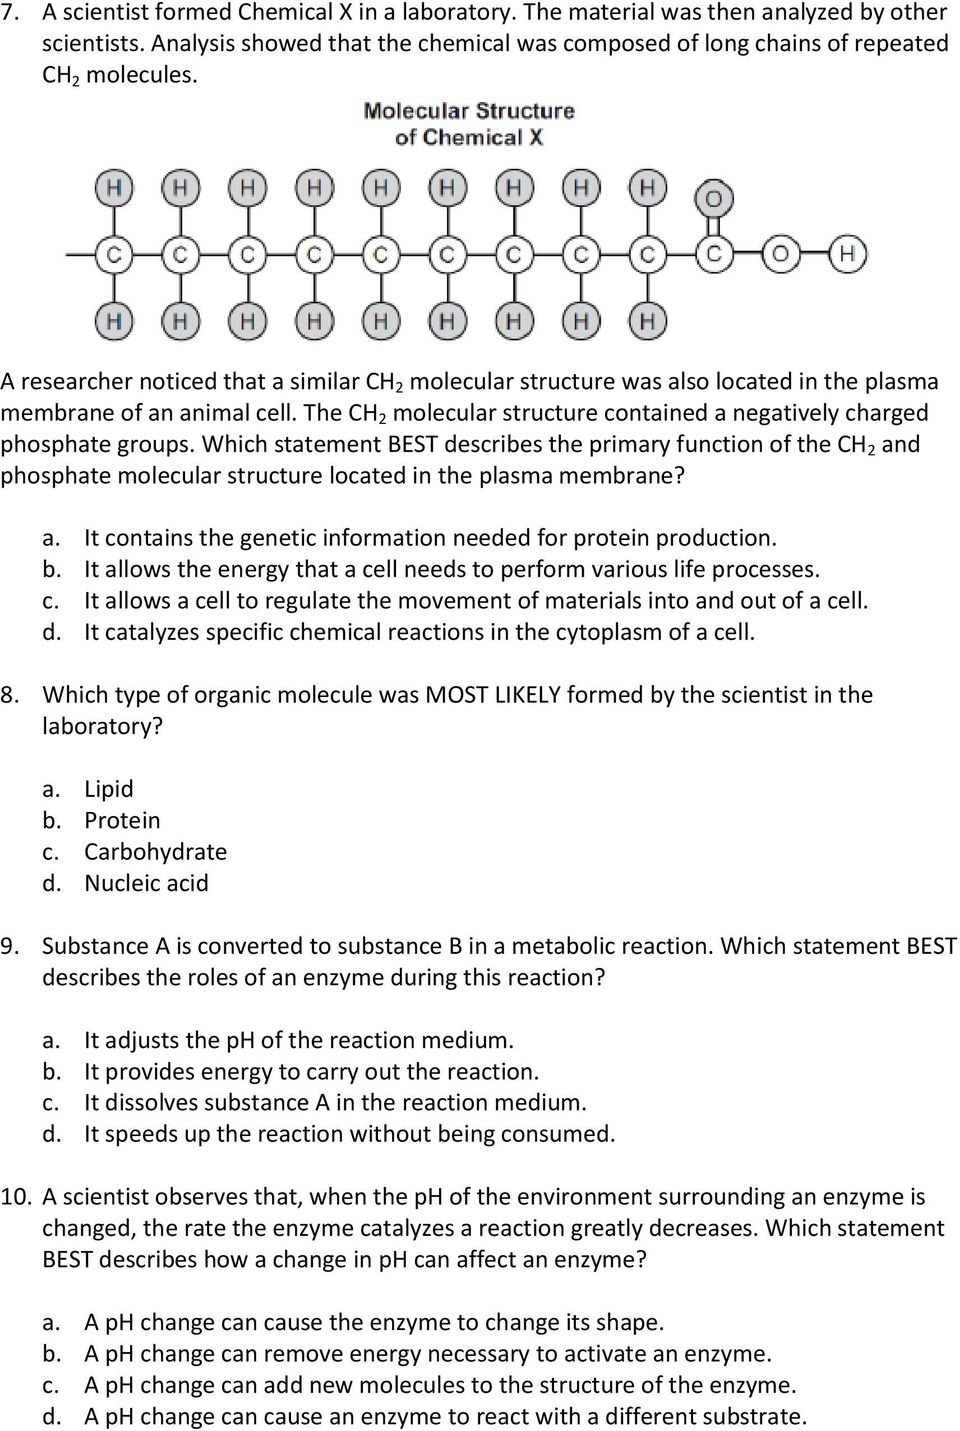 Which statement BEST describes the primary function of the CH 2 and phosphate molecular structure located in the plasma membrane? a. It contains the genetic information needed for protein production.